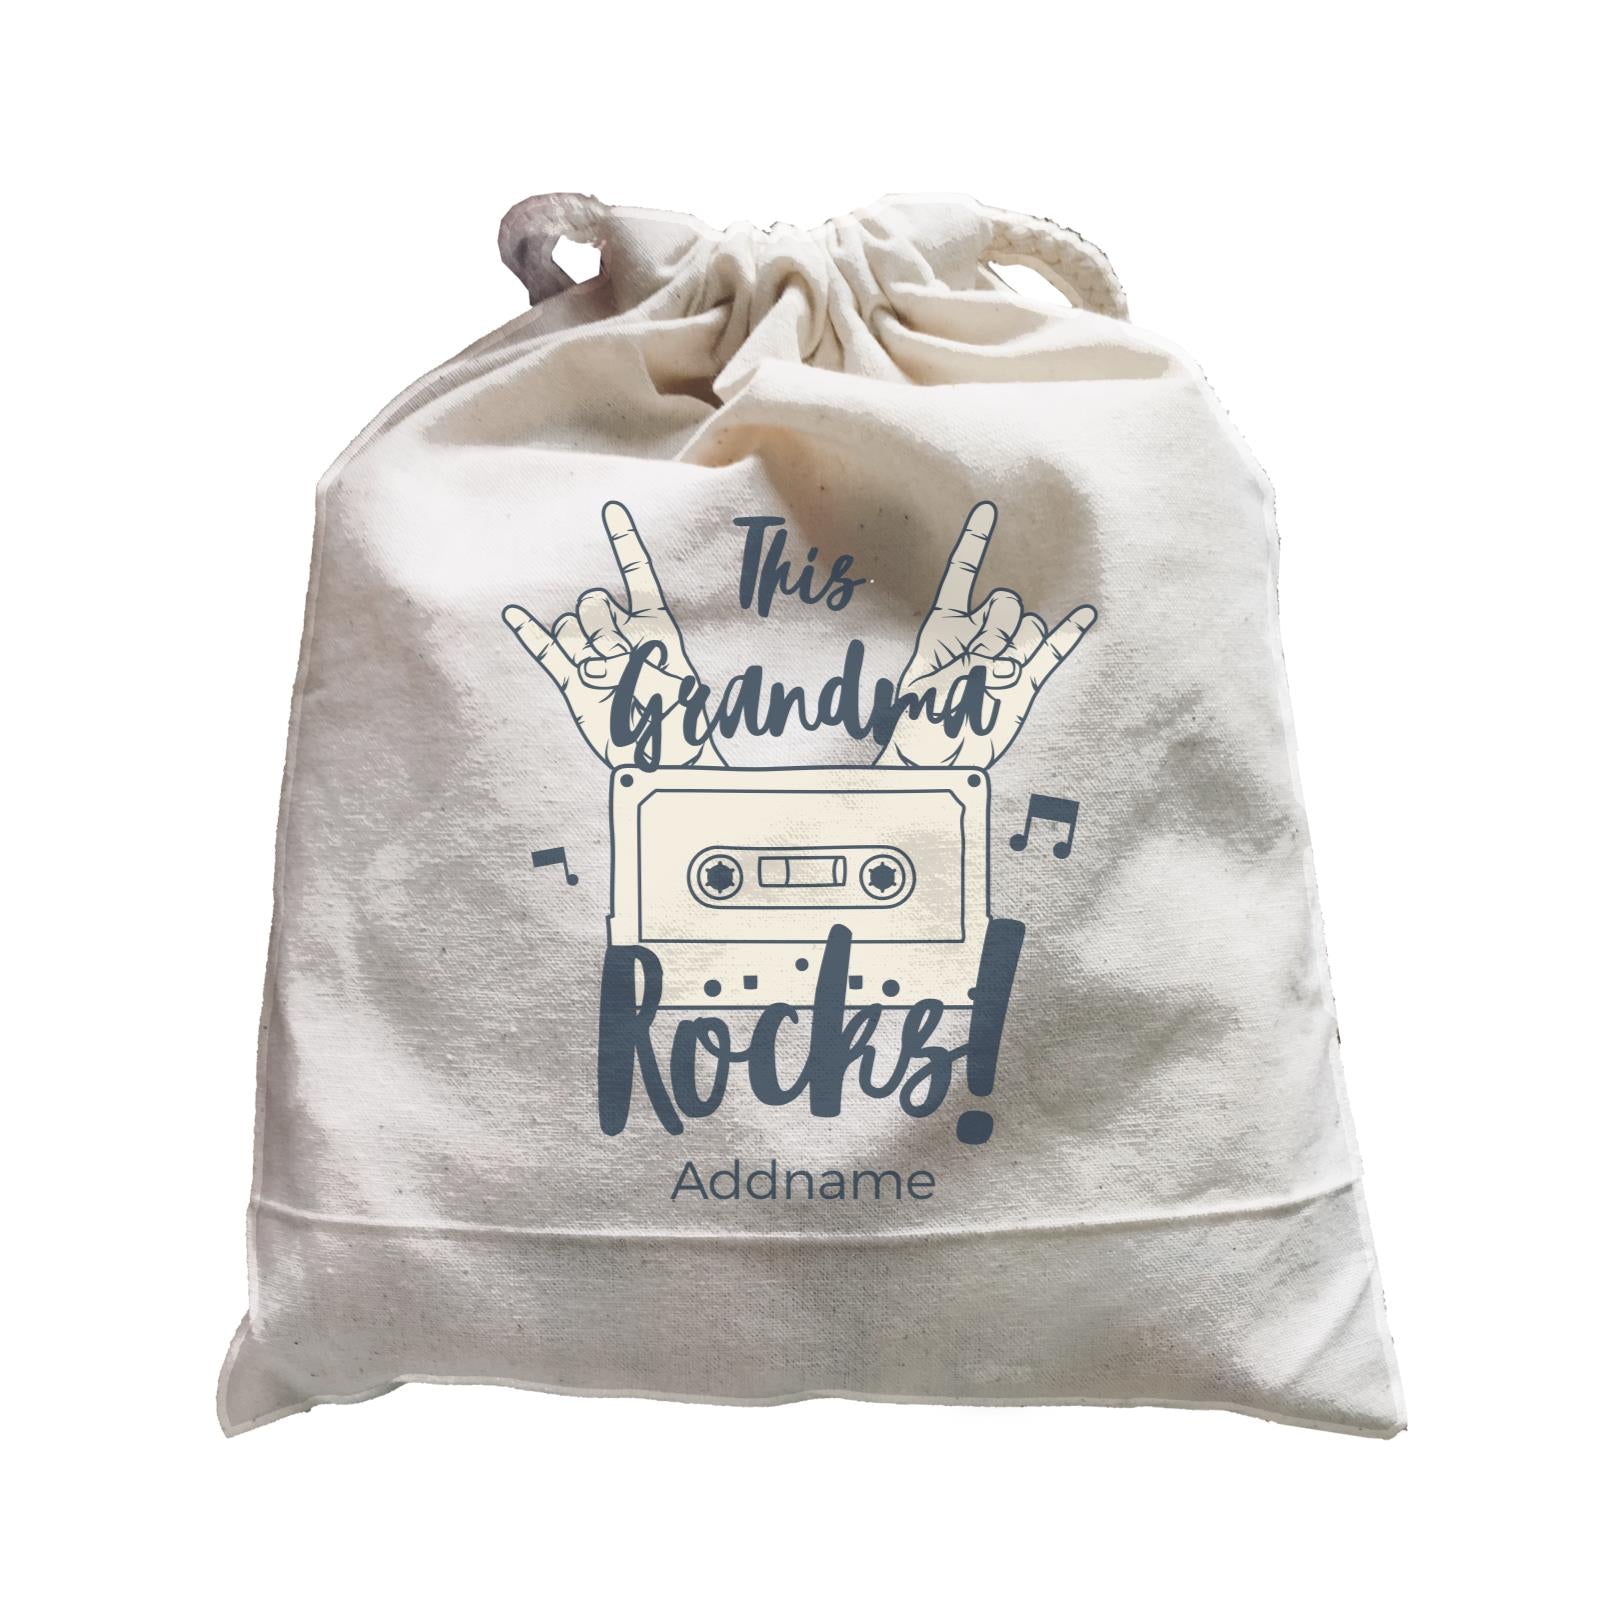 Awesome Mom 1 This Grandma Rocks! Cassette Addname Satchel